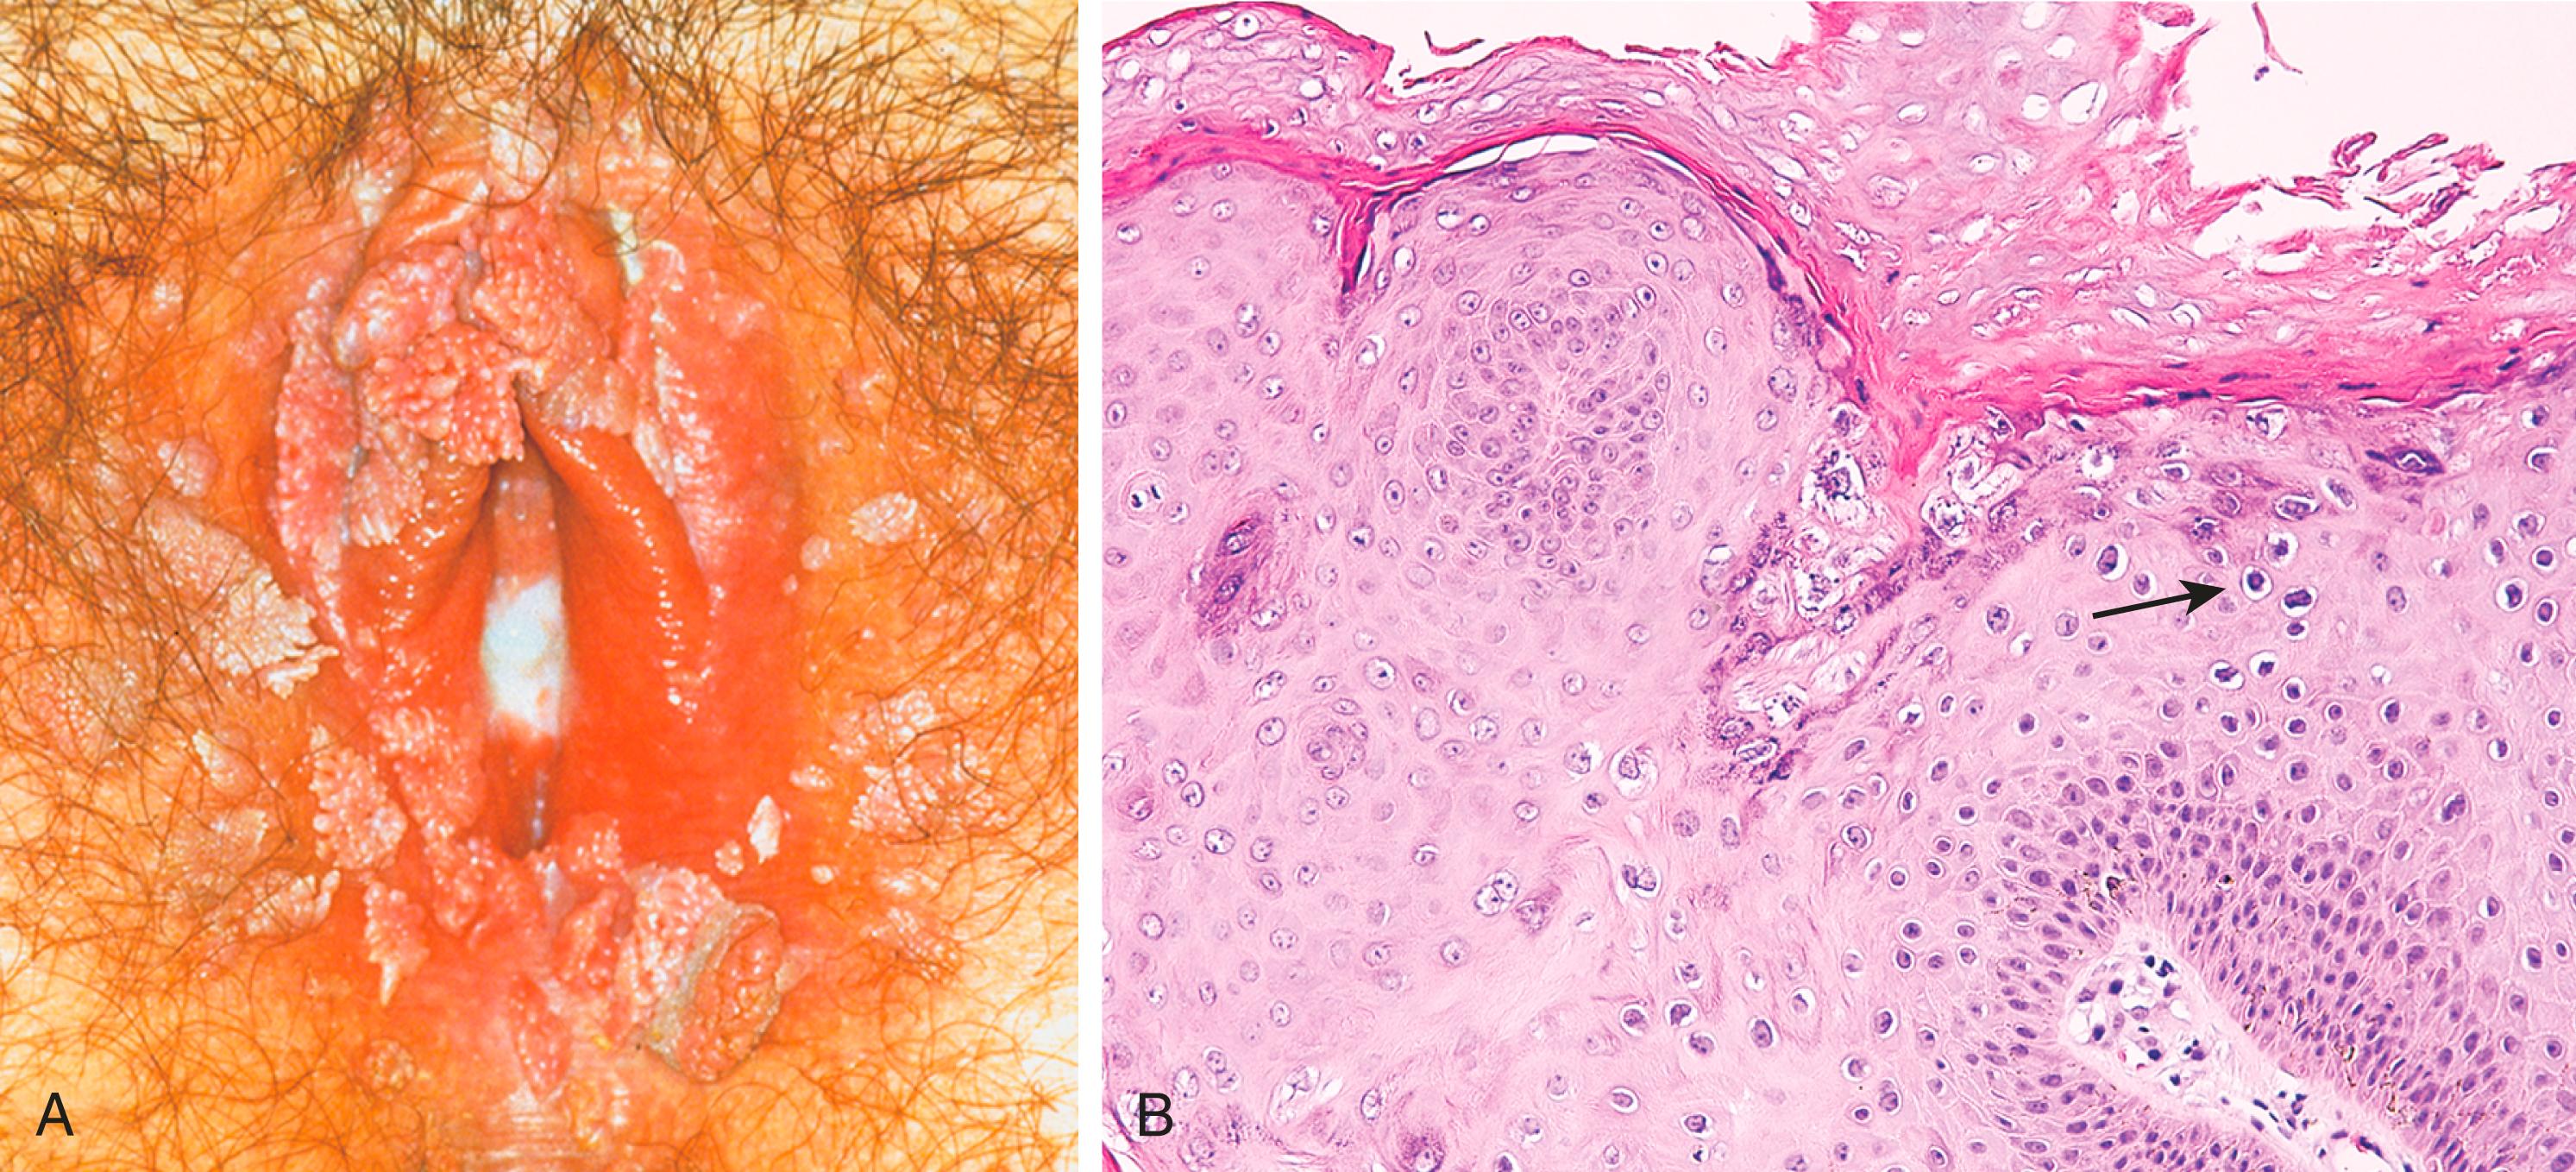 FIG. 17.2, (A) Numerous condylomas of the vulva. (B) Histopathologic features of condyloma acuminatum include acanthosis, hyperkeratosis, and human papillomavirus cytopathic effect (koilocytic atypia) characterized by atypical, enlarged, hyperchromatic nuclei with perinuclear halos (arrow).